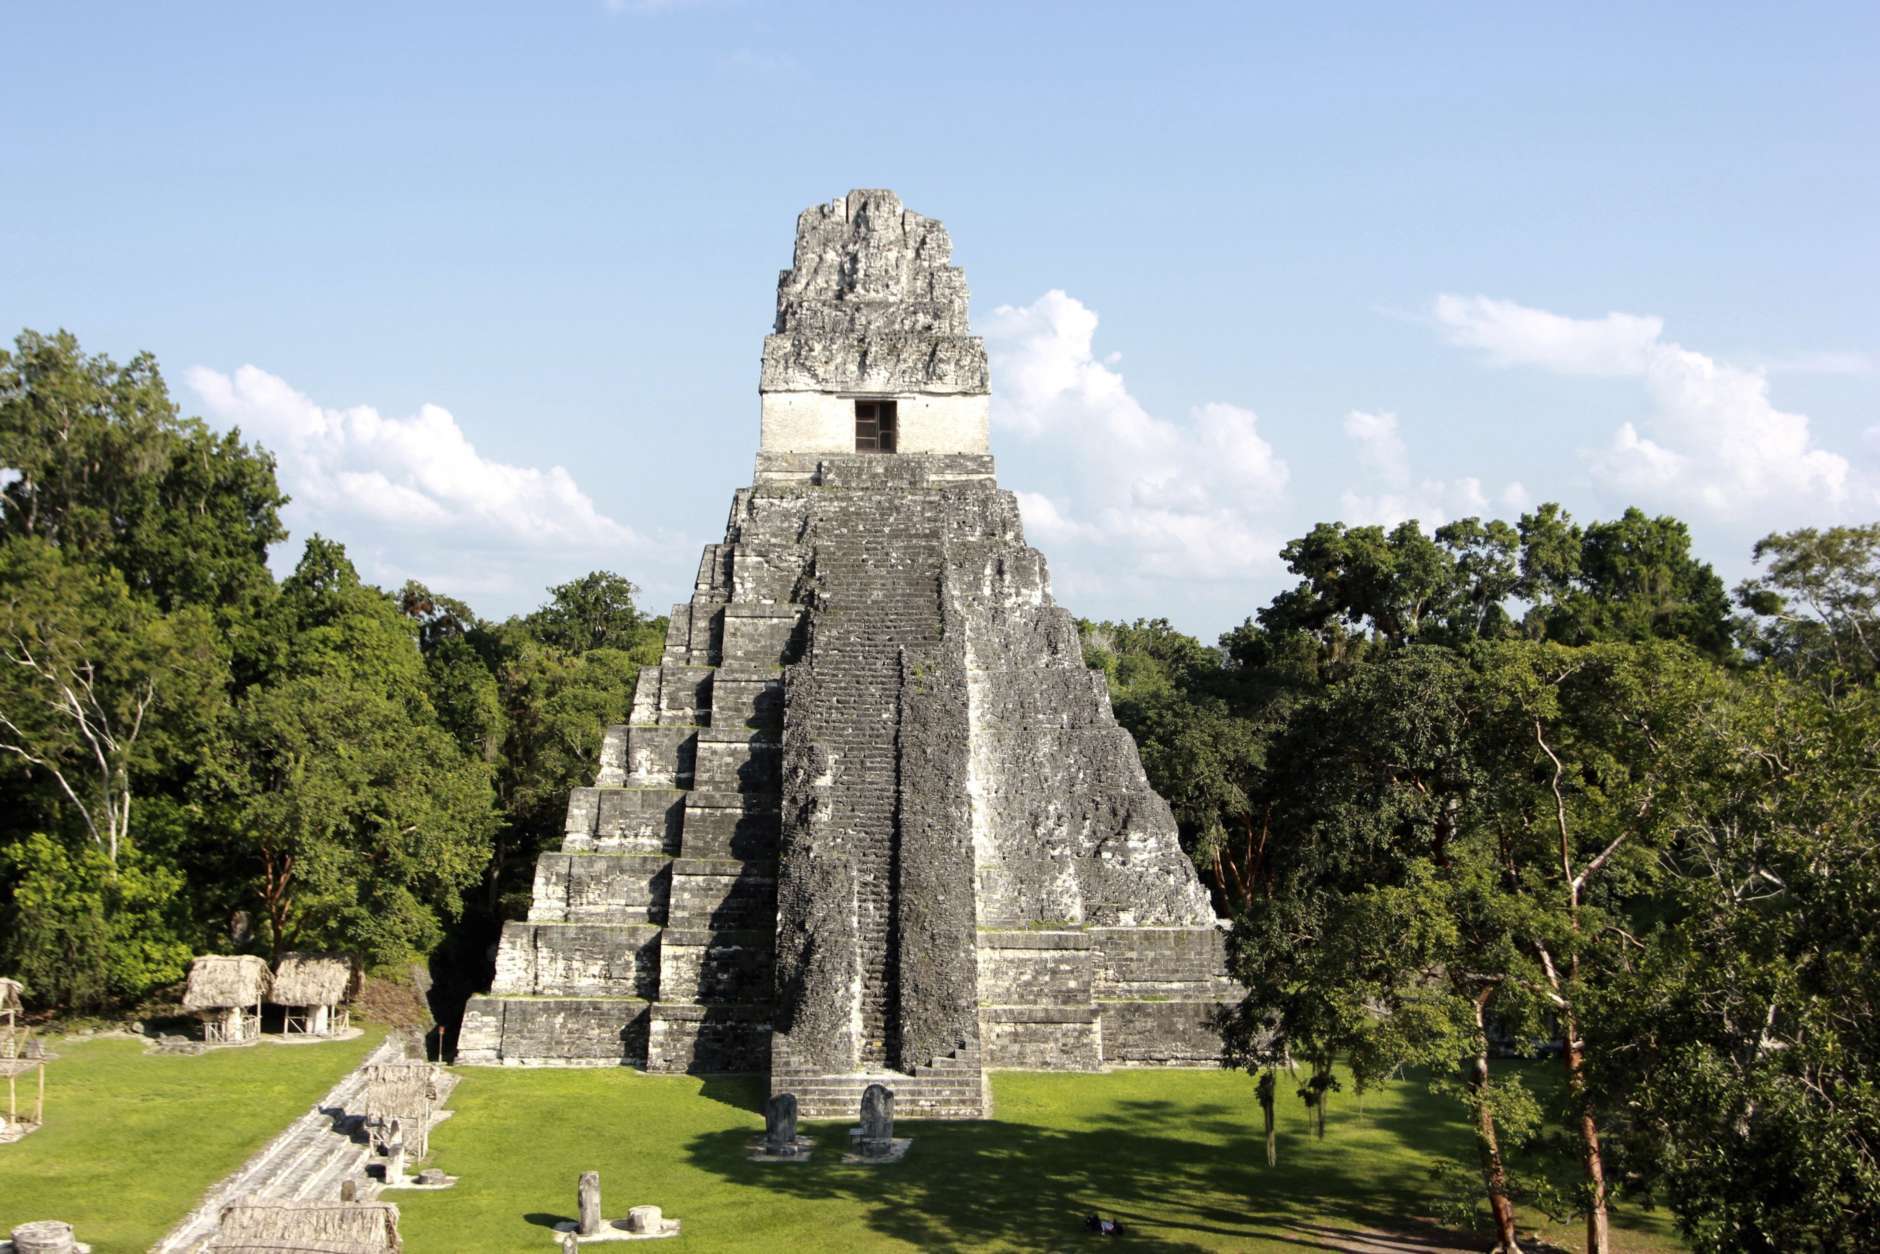 In this photograph taken Dec. 6, 2016, Temple I, also known as Temple of the Great Jaguar, is seen during a sunny day in northern Guatemala's Tikal National Park. The sprawling park in northern Guatemala is one of the country's top travel attractions, showcasing the Mayan civilization's engineering feats. (AP Photo/Manuel Valdes)